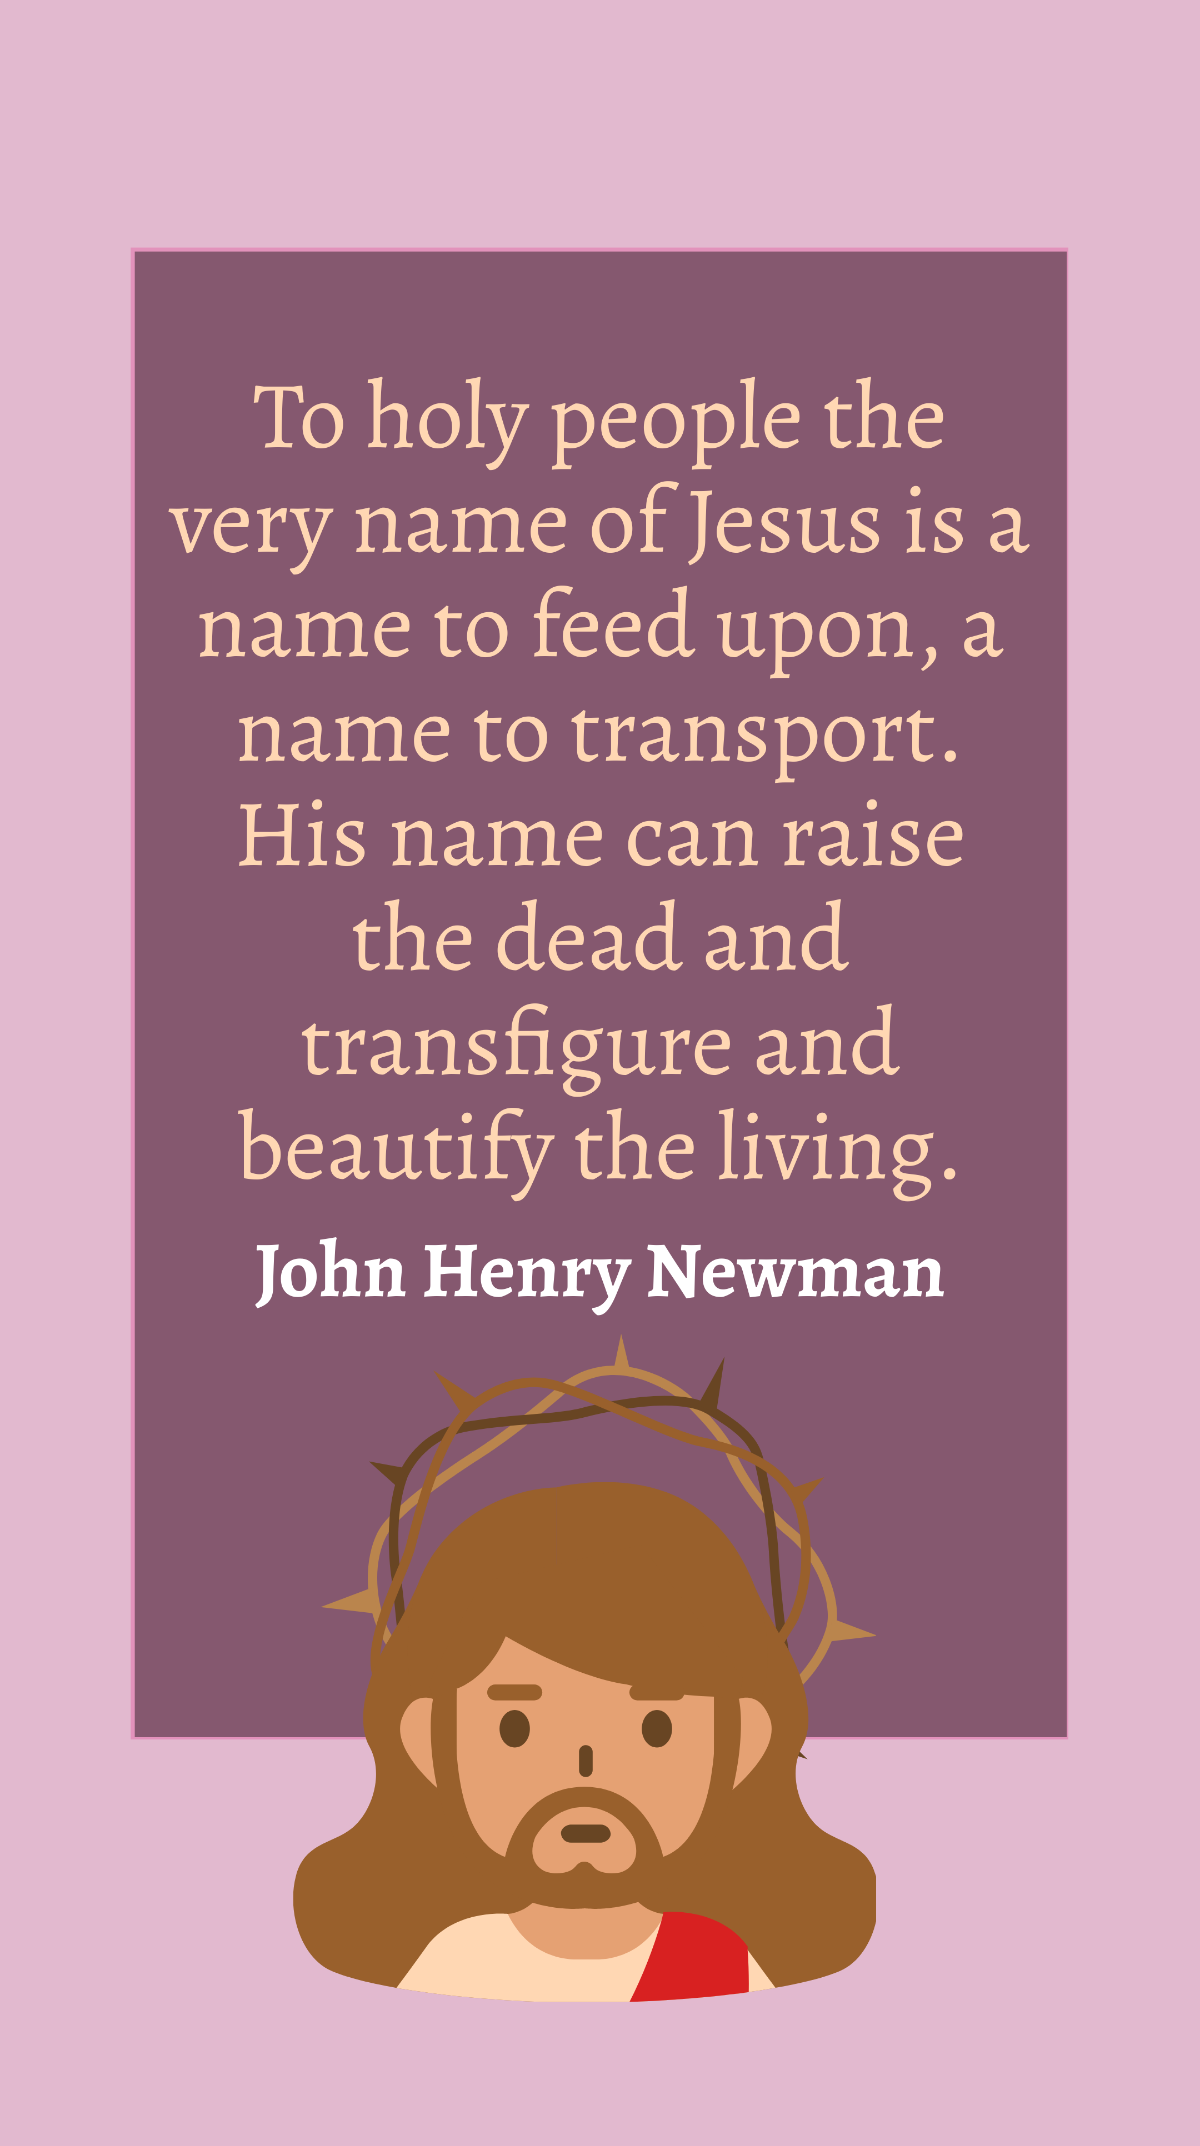 John Henry Newman - To holy people the very name of Jesus is a name to feed upon, a name to transport. His name can raise the dead and transfigure and beautify the living. Template